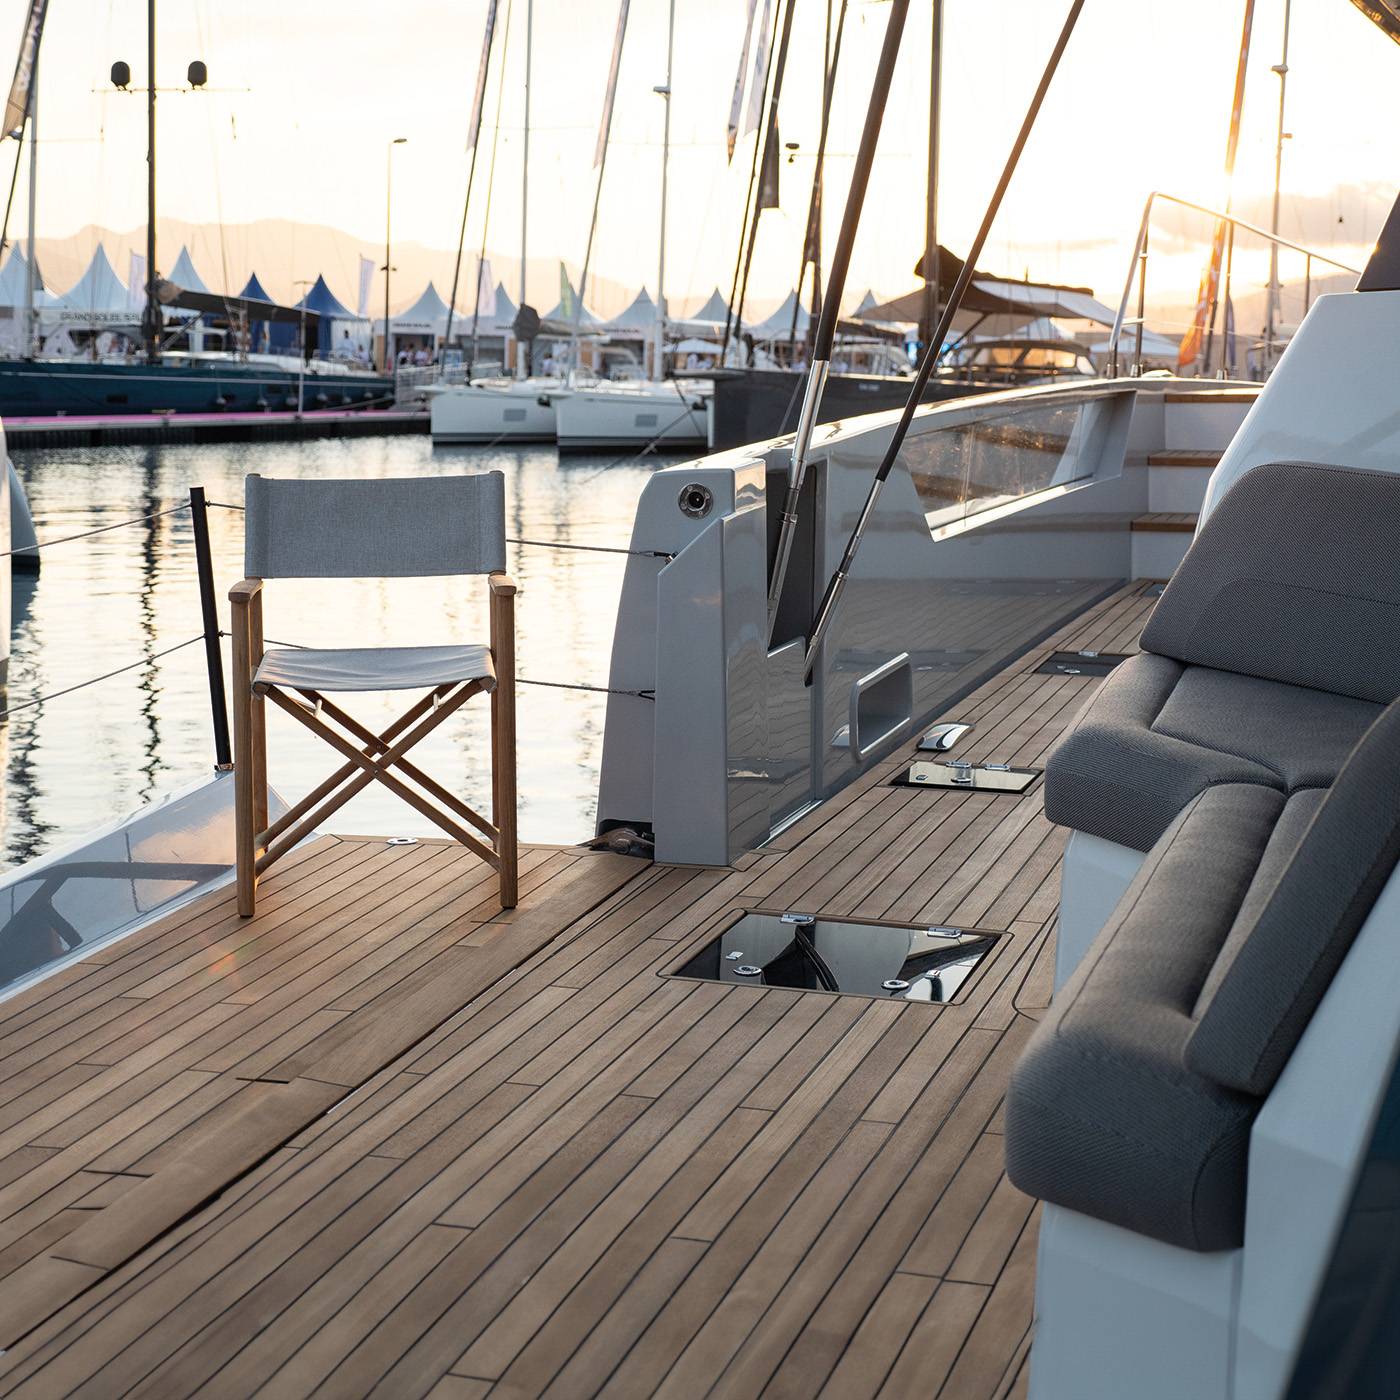 THIRA-80-Fountaine-Pajot-Super-Yacht-Cannes-Yachting-Festival-Fountaine-Pajot